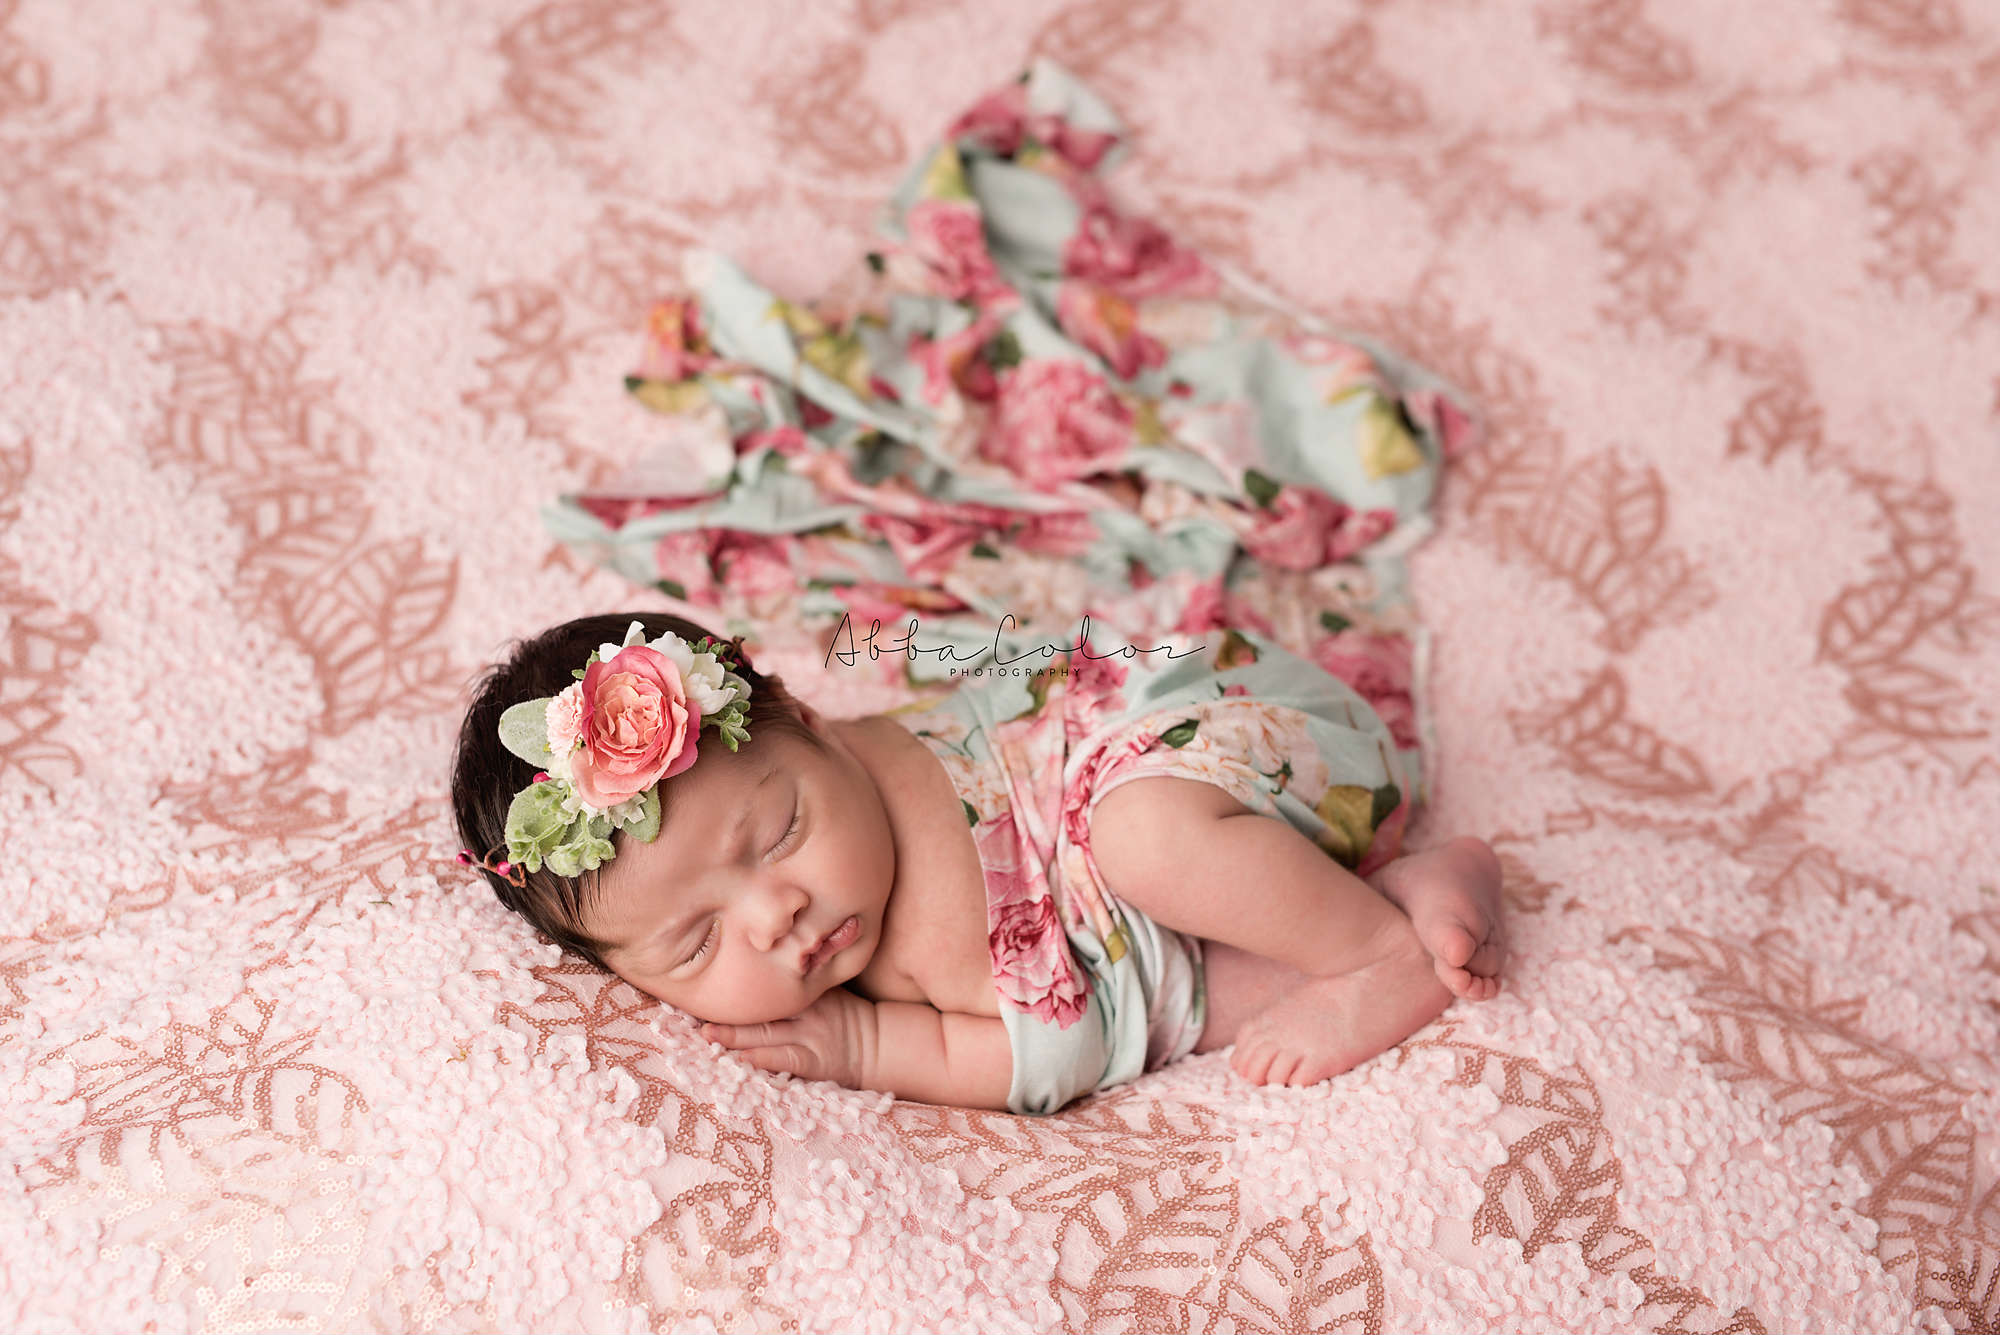 Take Your Newborn Photography to the Next Level With These Simple Tips